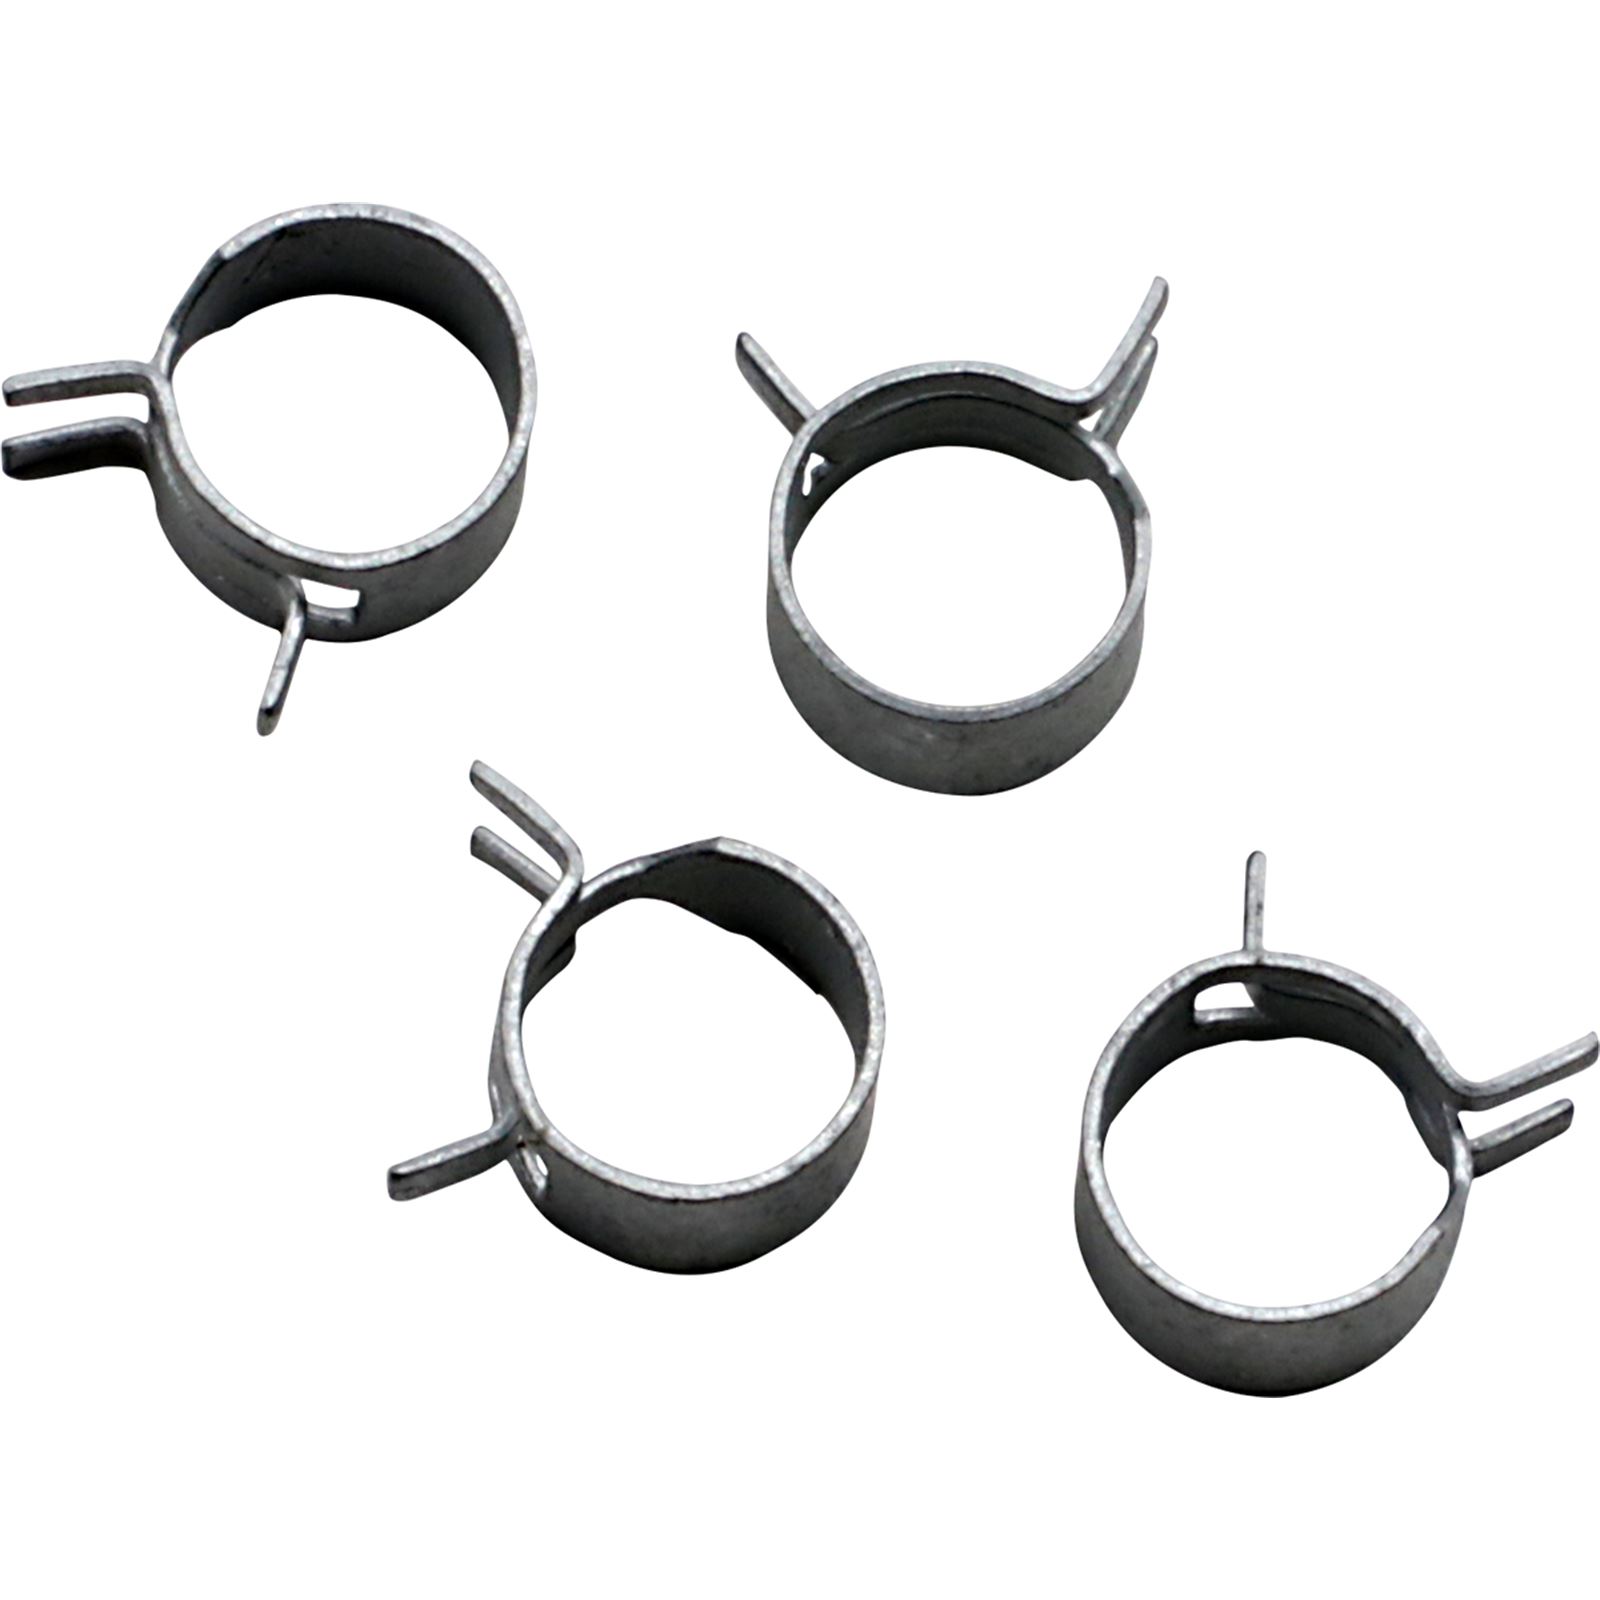 Fuel Star 4/Pack Refill Wire Silver Clamp